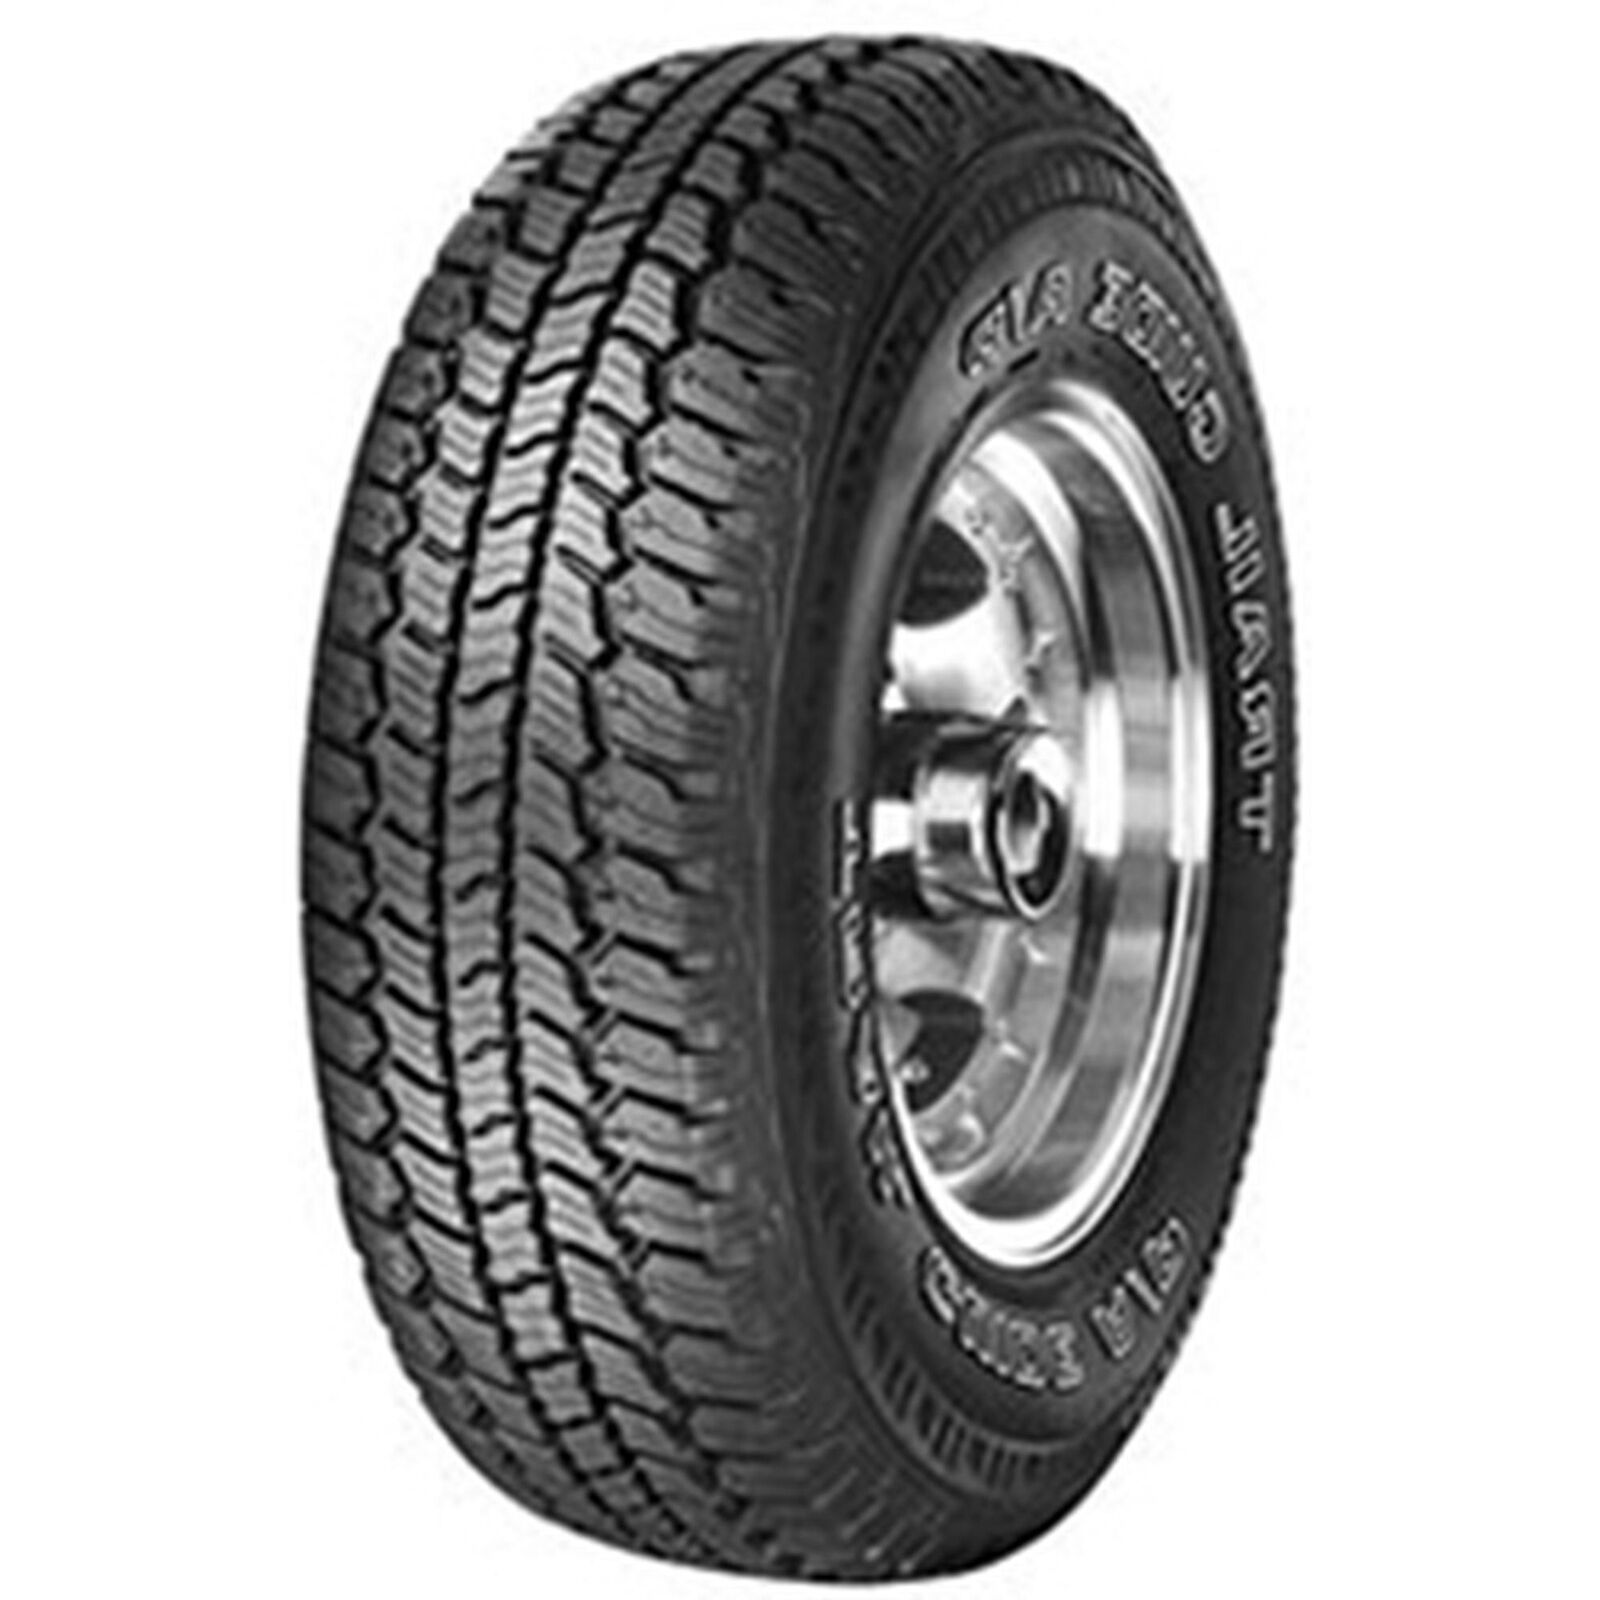 1 New Sigma Trail Guide A/t  - P265x70r17 Tires 2657017 265 70 17